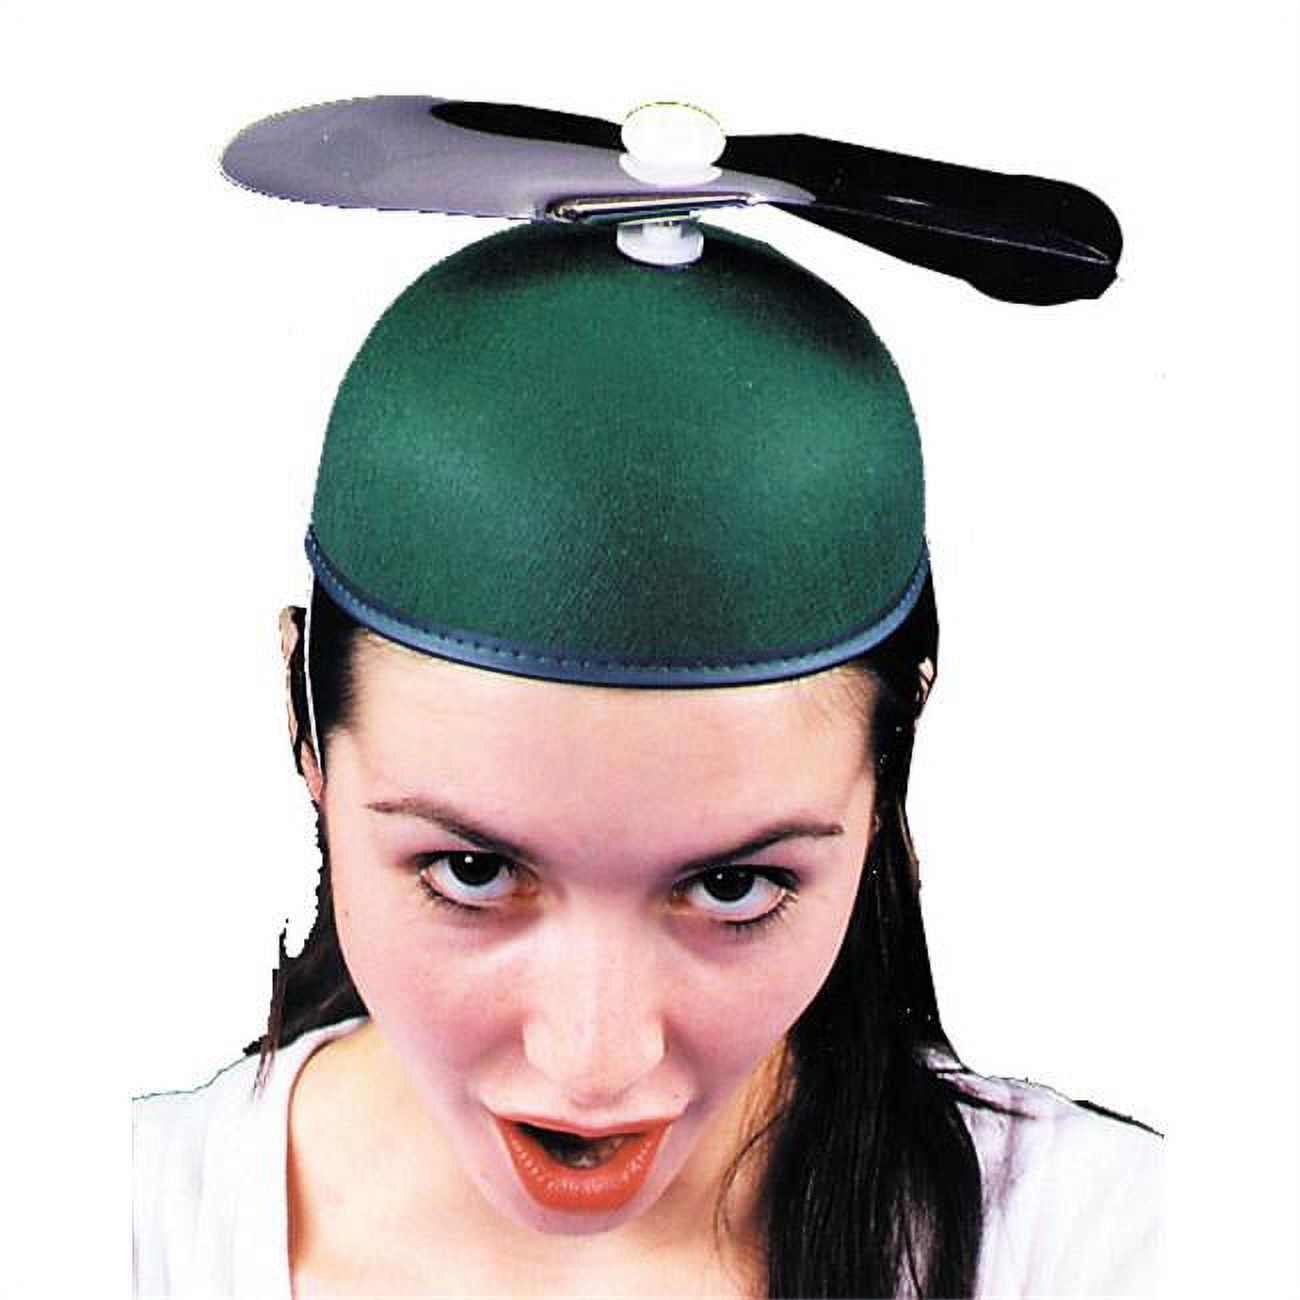 Costumes For All Occasions GC20 Beanie Propeller - image 1 of 2